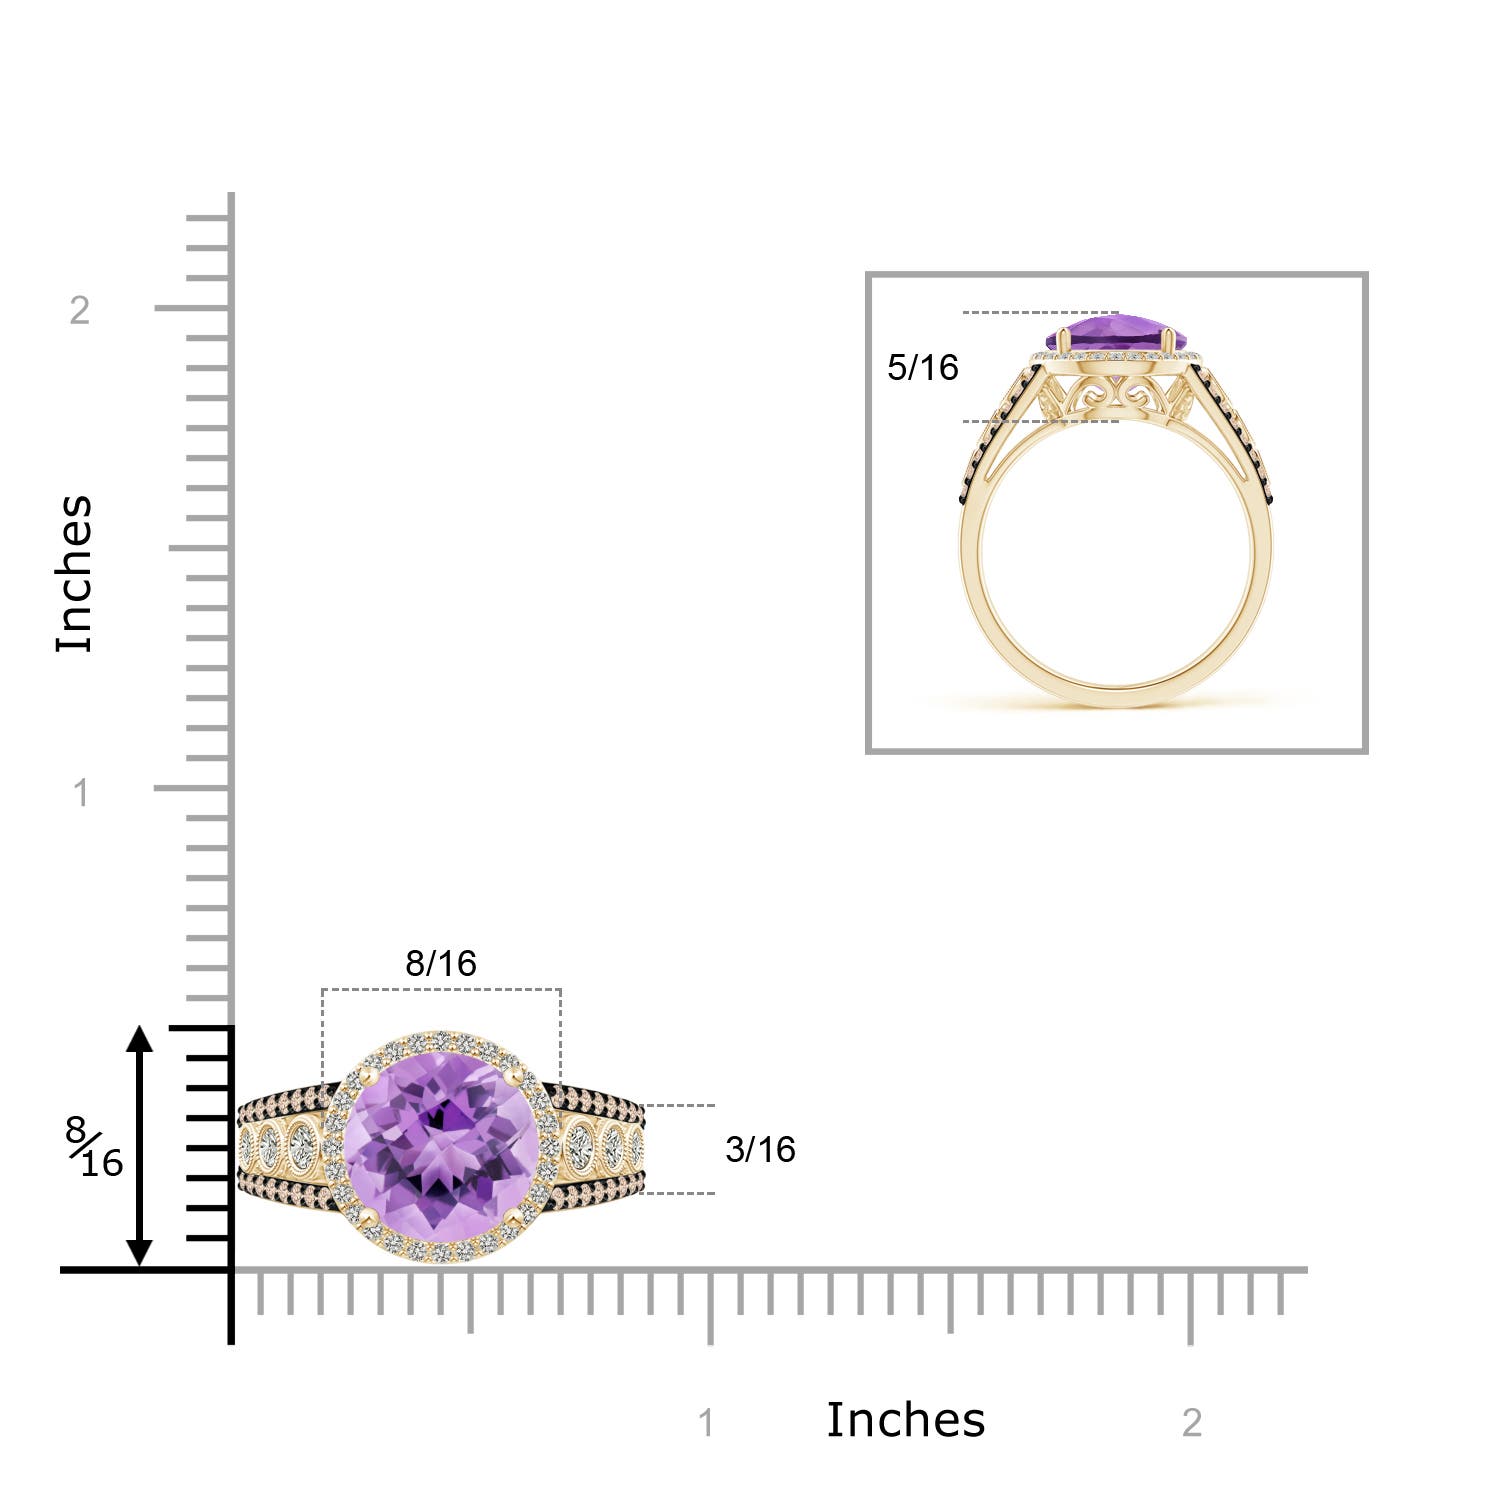 A - Amethyst / 4.42 CT / 14 KT Yellow Gold